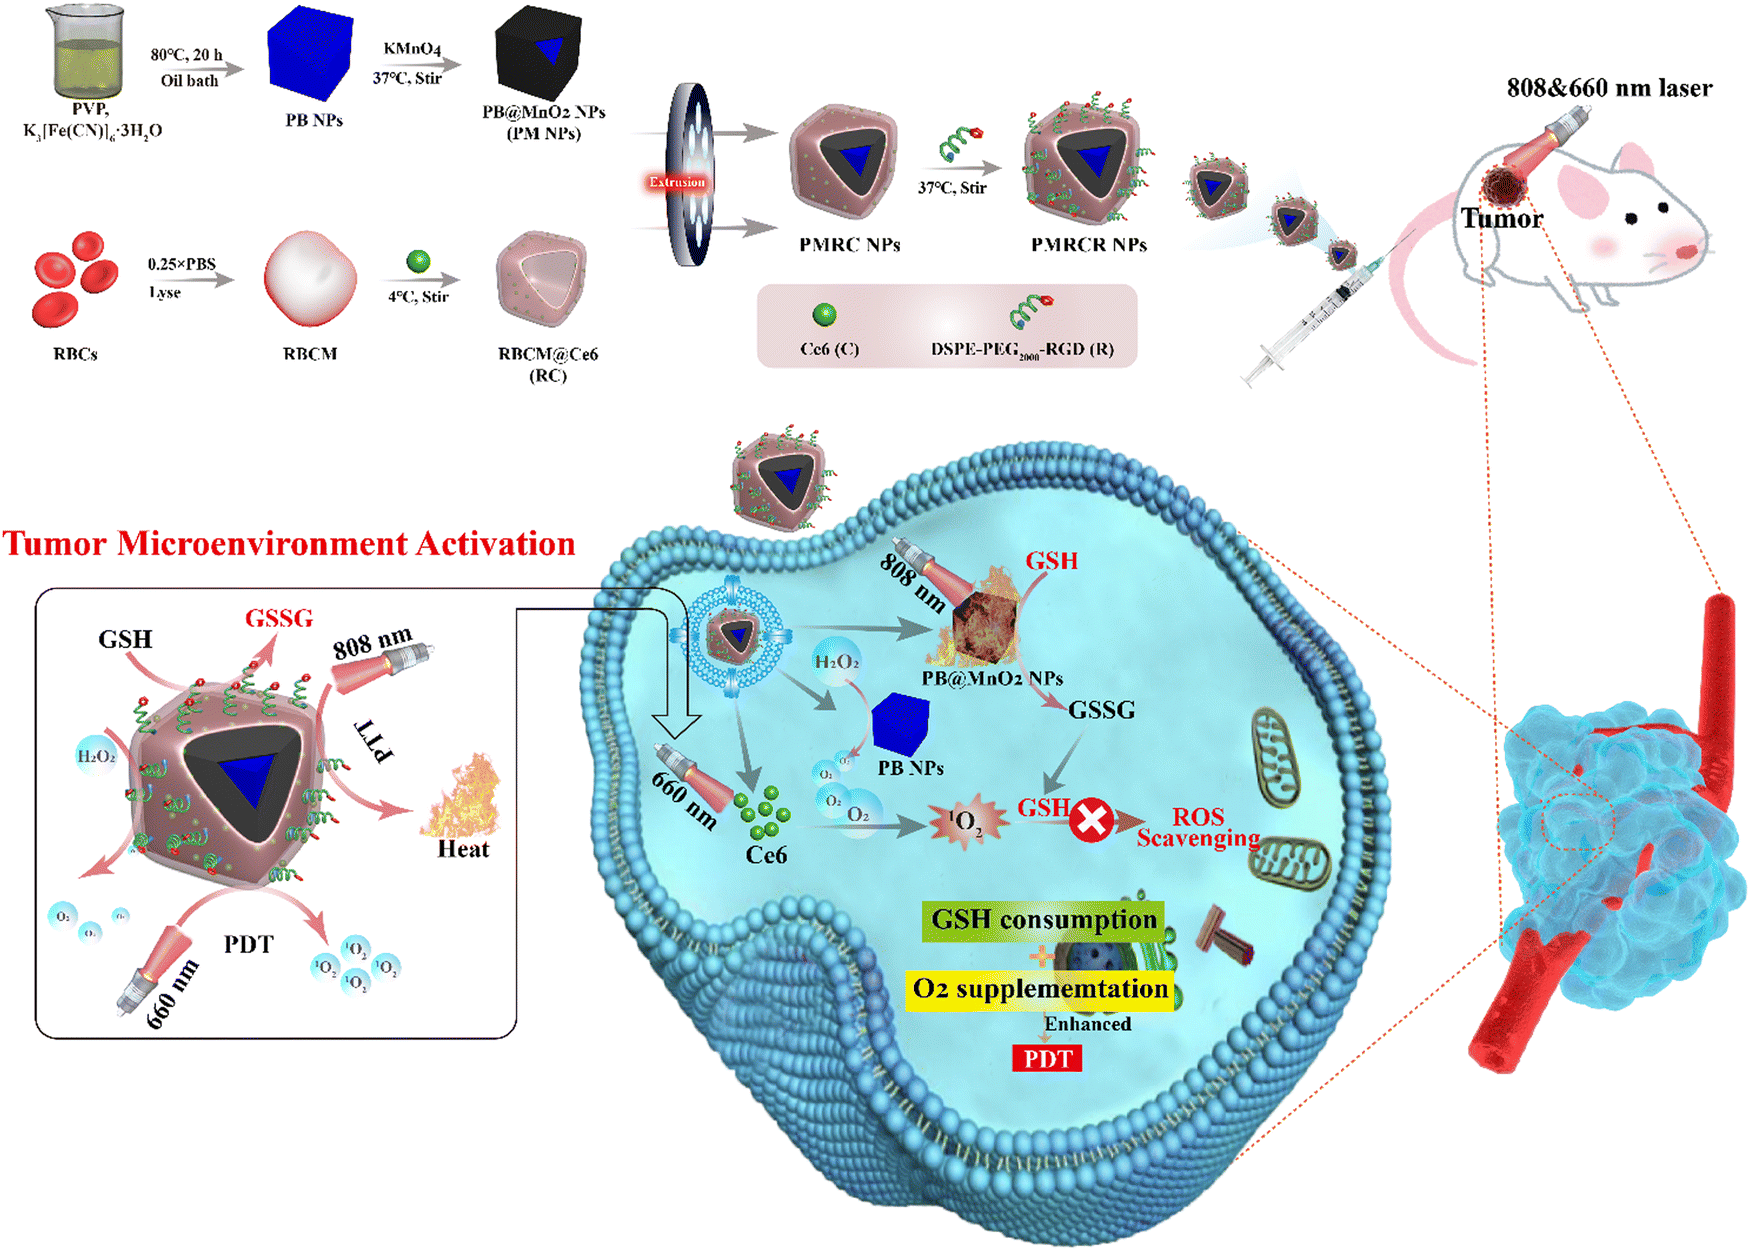 Erythrocyte membrane-camouflaged Prussian blue nanocomplexes for  combinational therapy of triple-negative breast cancer - Journal of  Materials Chemistry B (RSC Publishing) DOI:10.1039/D2TB02289C